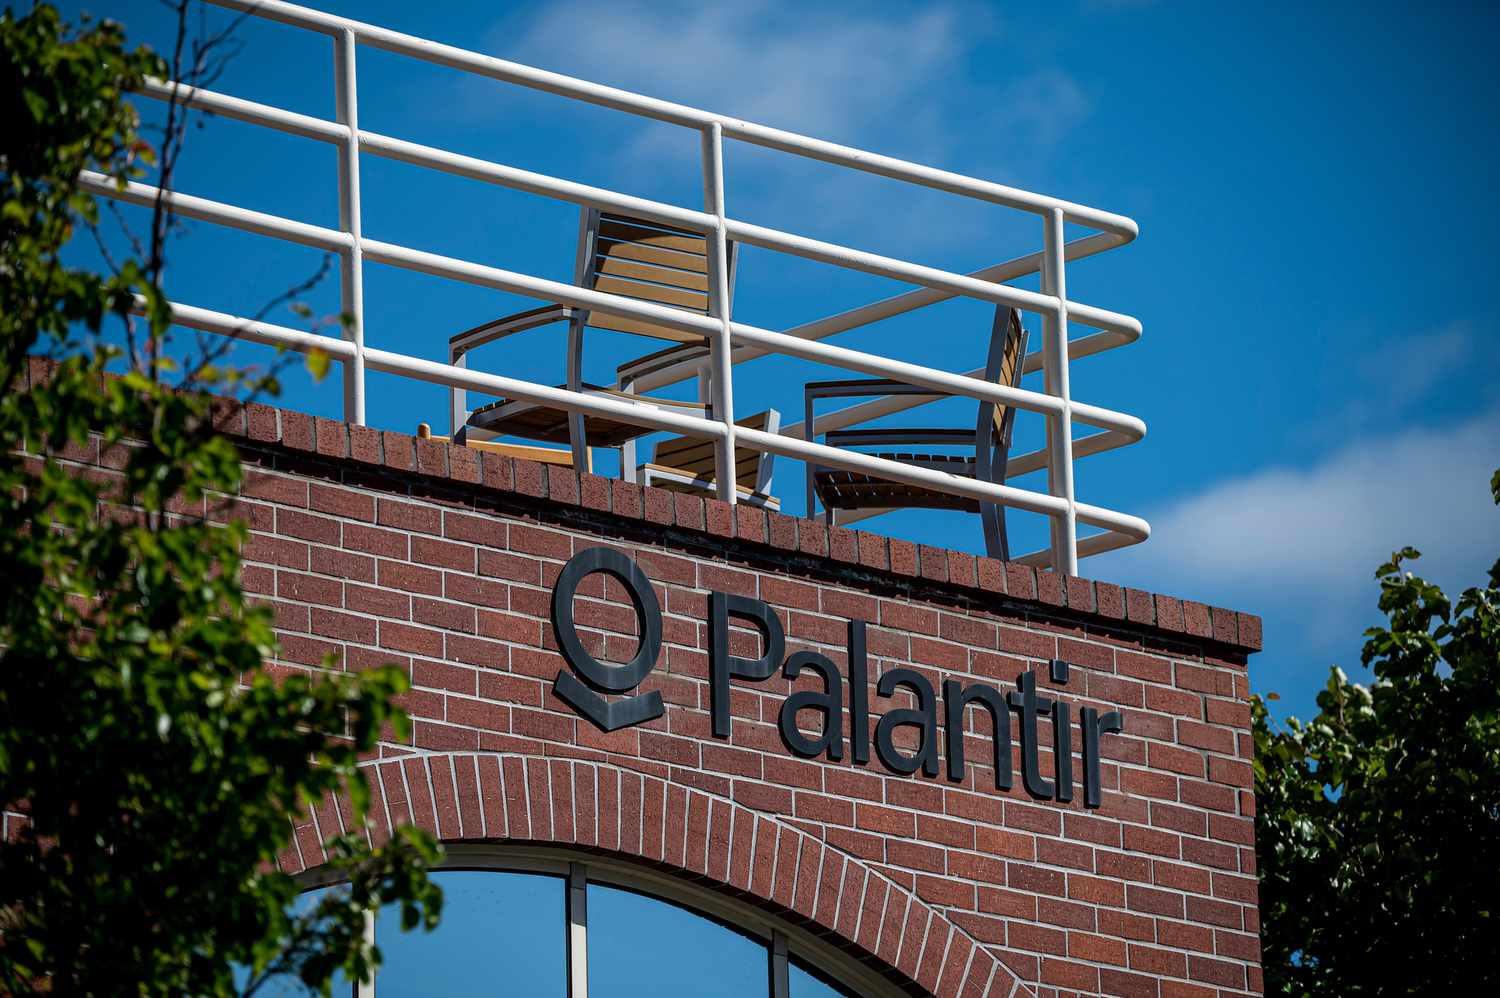 What You Need To Know Ahead of Palantir